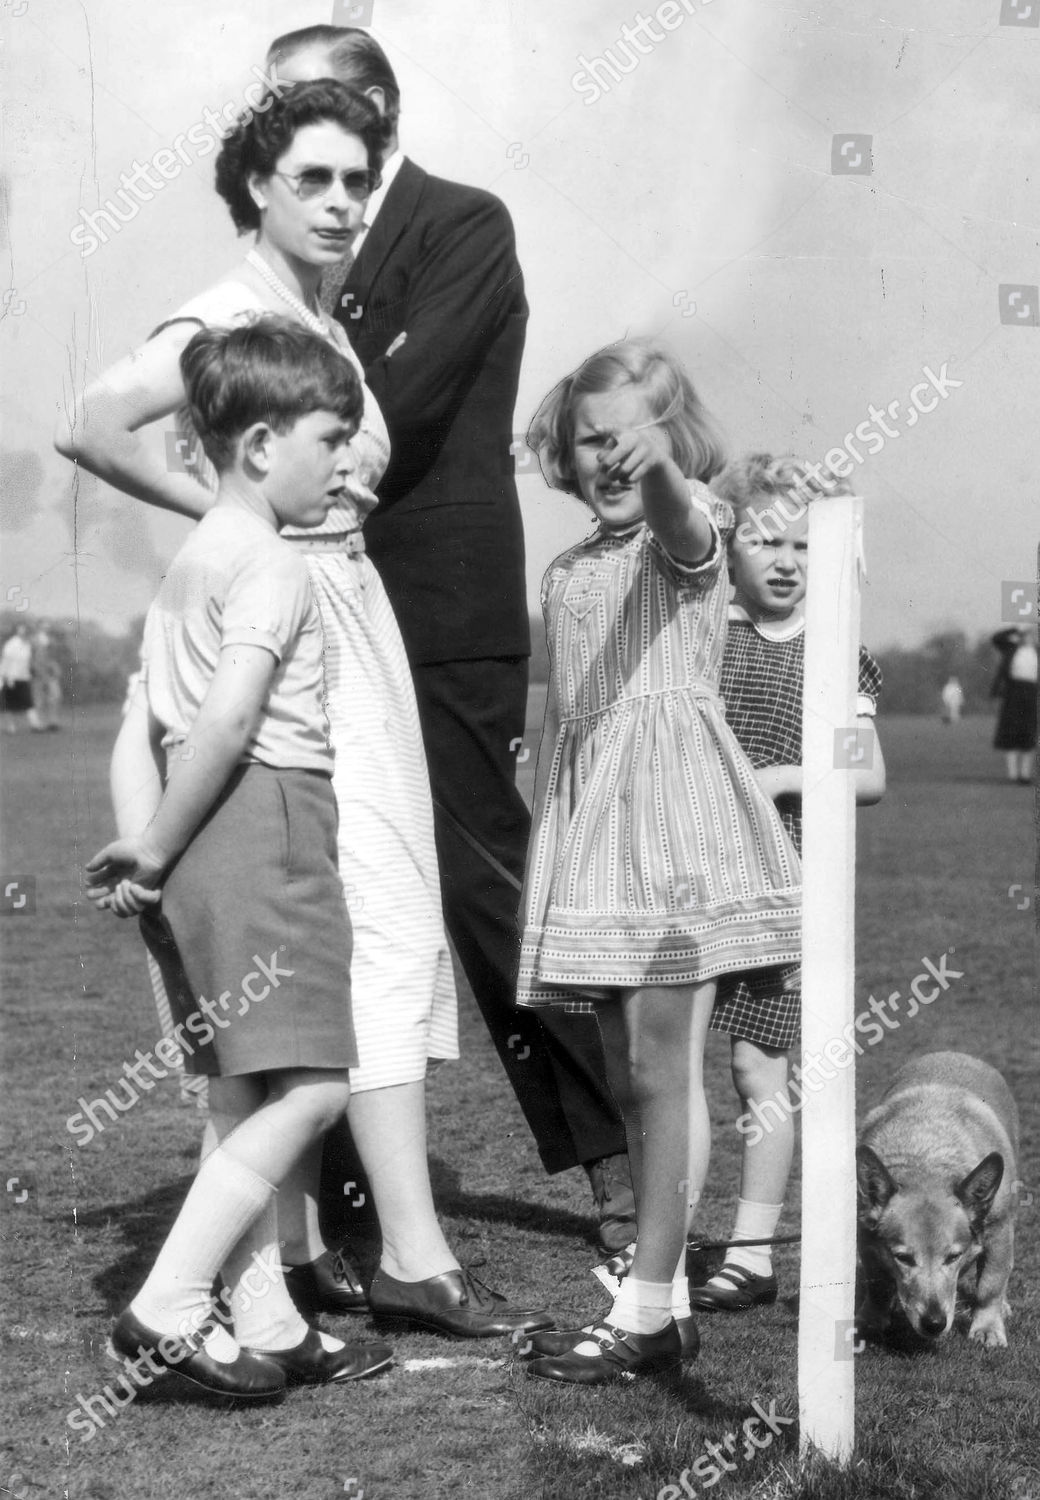 queen-elizabeth-ii-pets-picture-shows-the-queen-with-young-prince-charles-now-prince-of-wales-and-princess-anne-now-princess-royal-right-and-a-corgi-marylin-wills-2nd-right-is-the-name-of-the-princesss-friend-shutterstock-editorial-1032959a.jpg